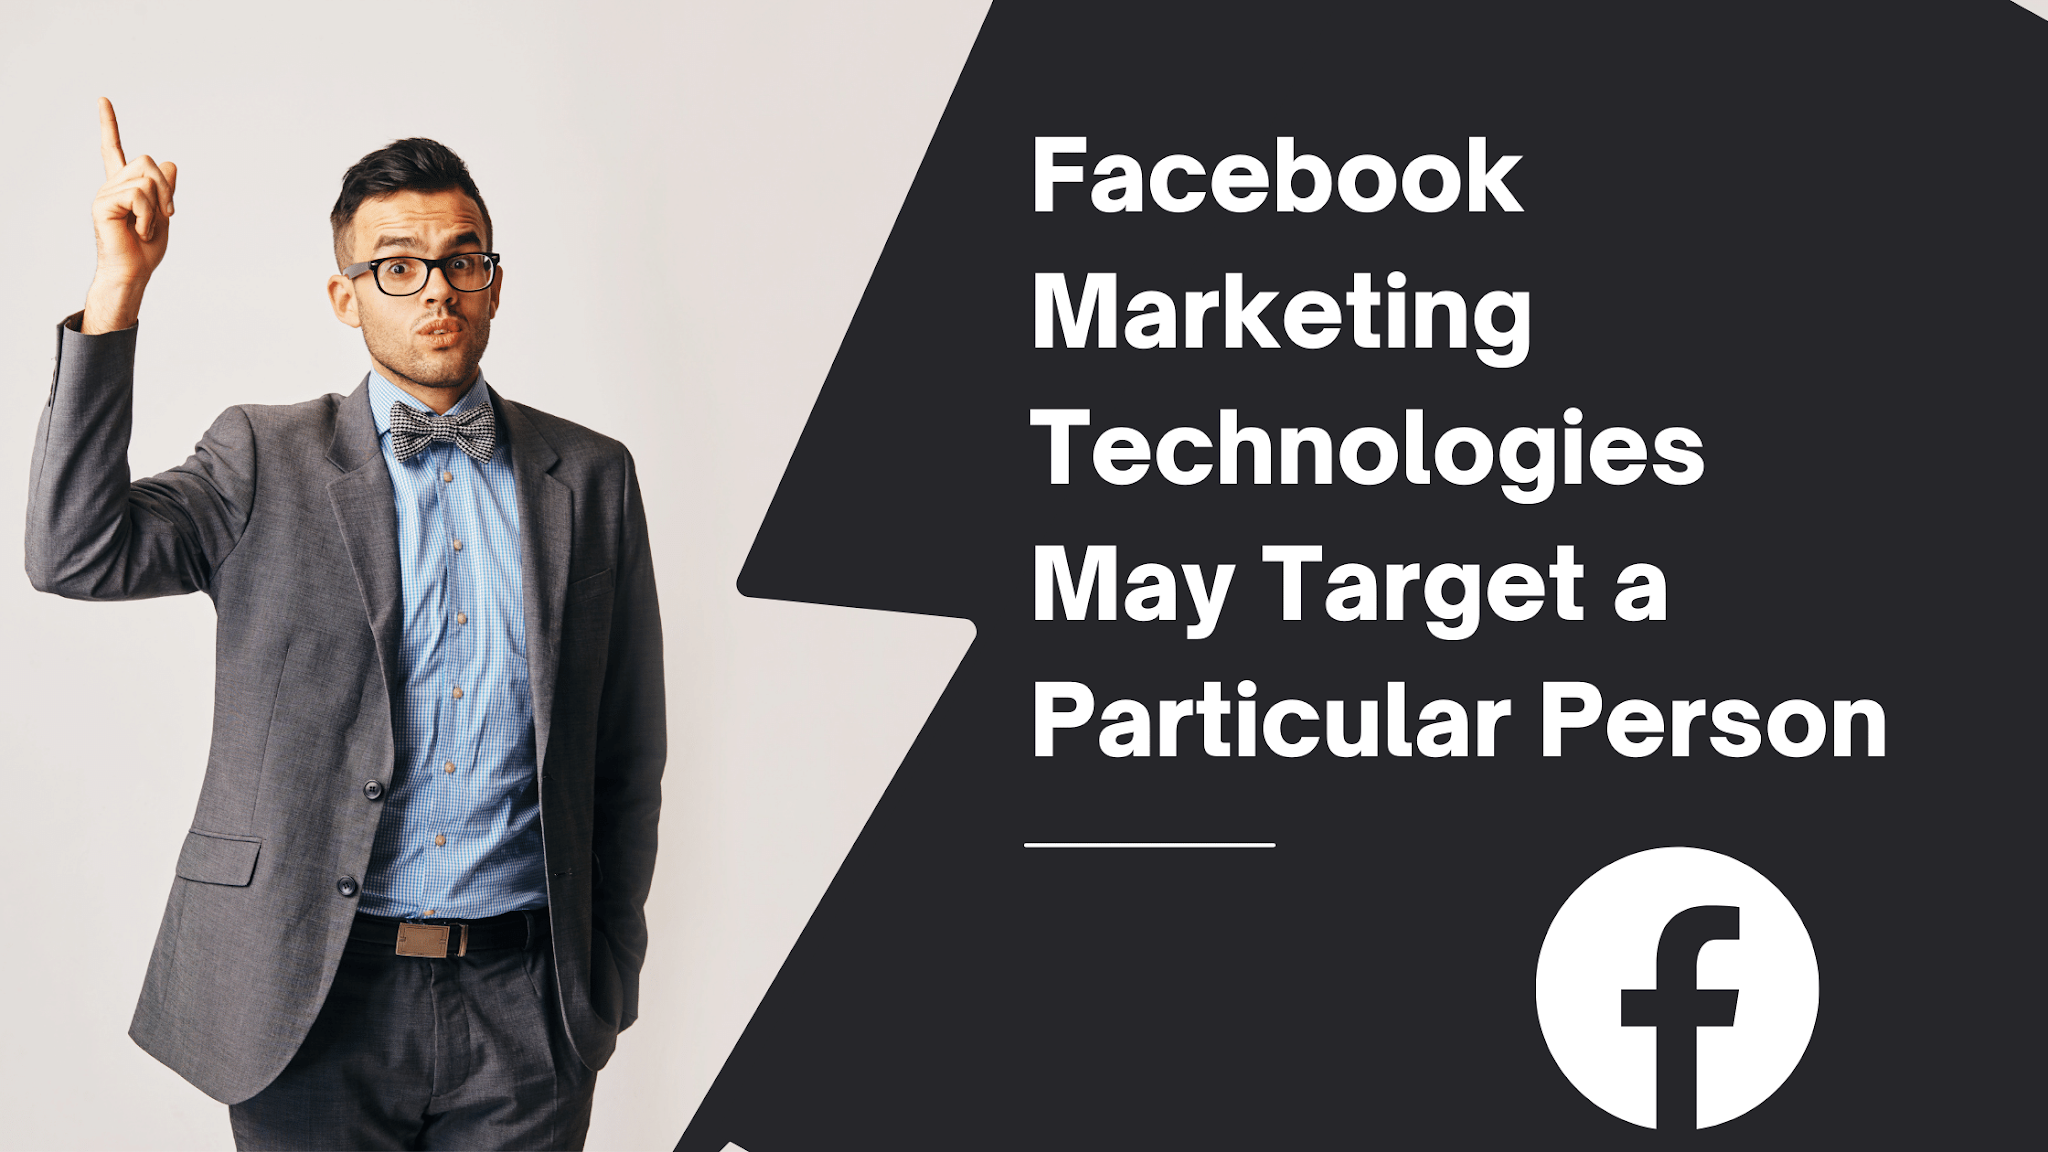 Facebook's marketing technologies may target a particular person, according to researchers